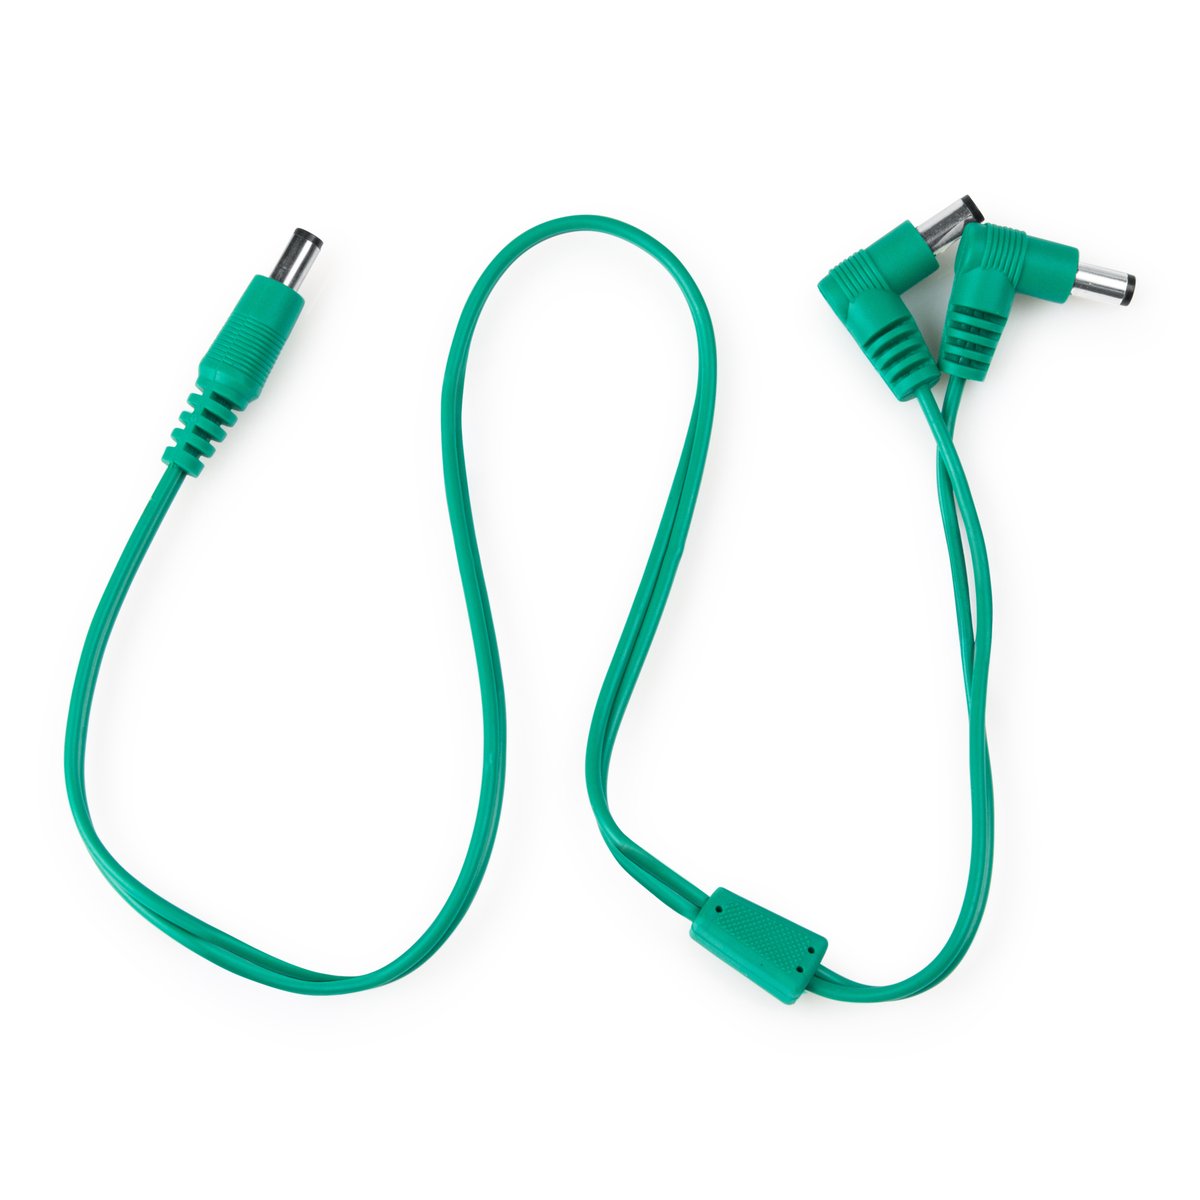 Current Doubler Adapter Cable for Line 6 HX Effects & HX Stomp Pedals